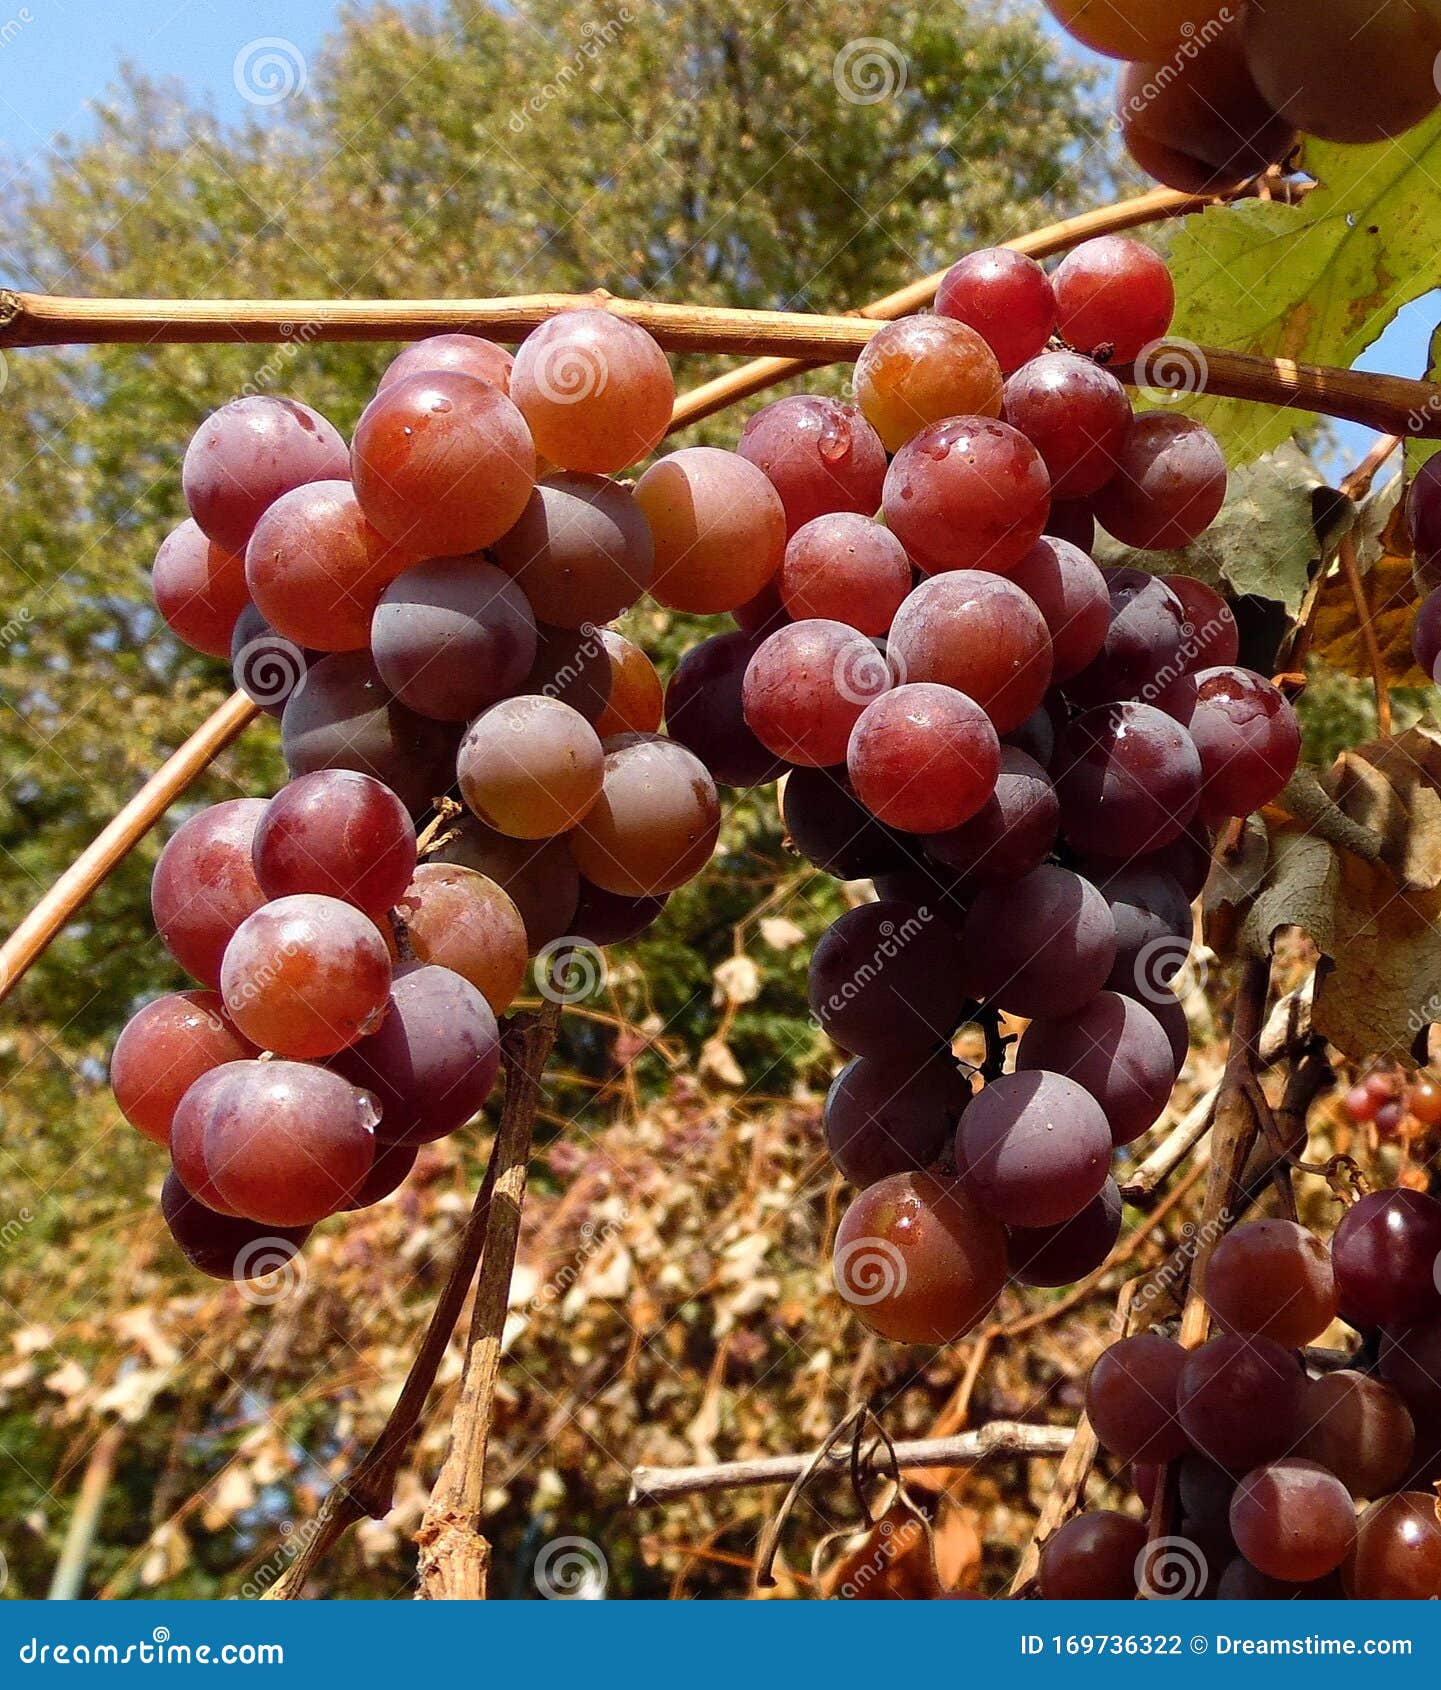 ripe bunches of pink grapes hang on a branch of a vineyard against a blue sky